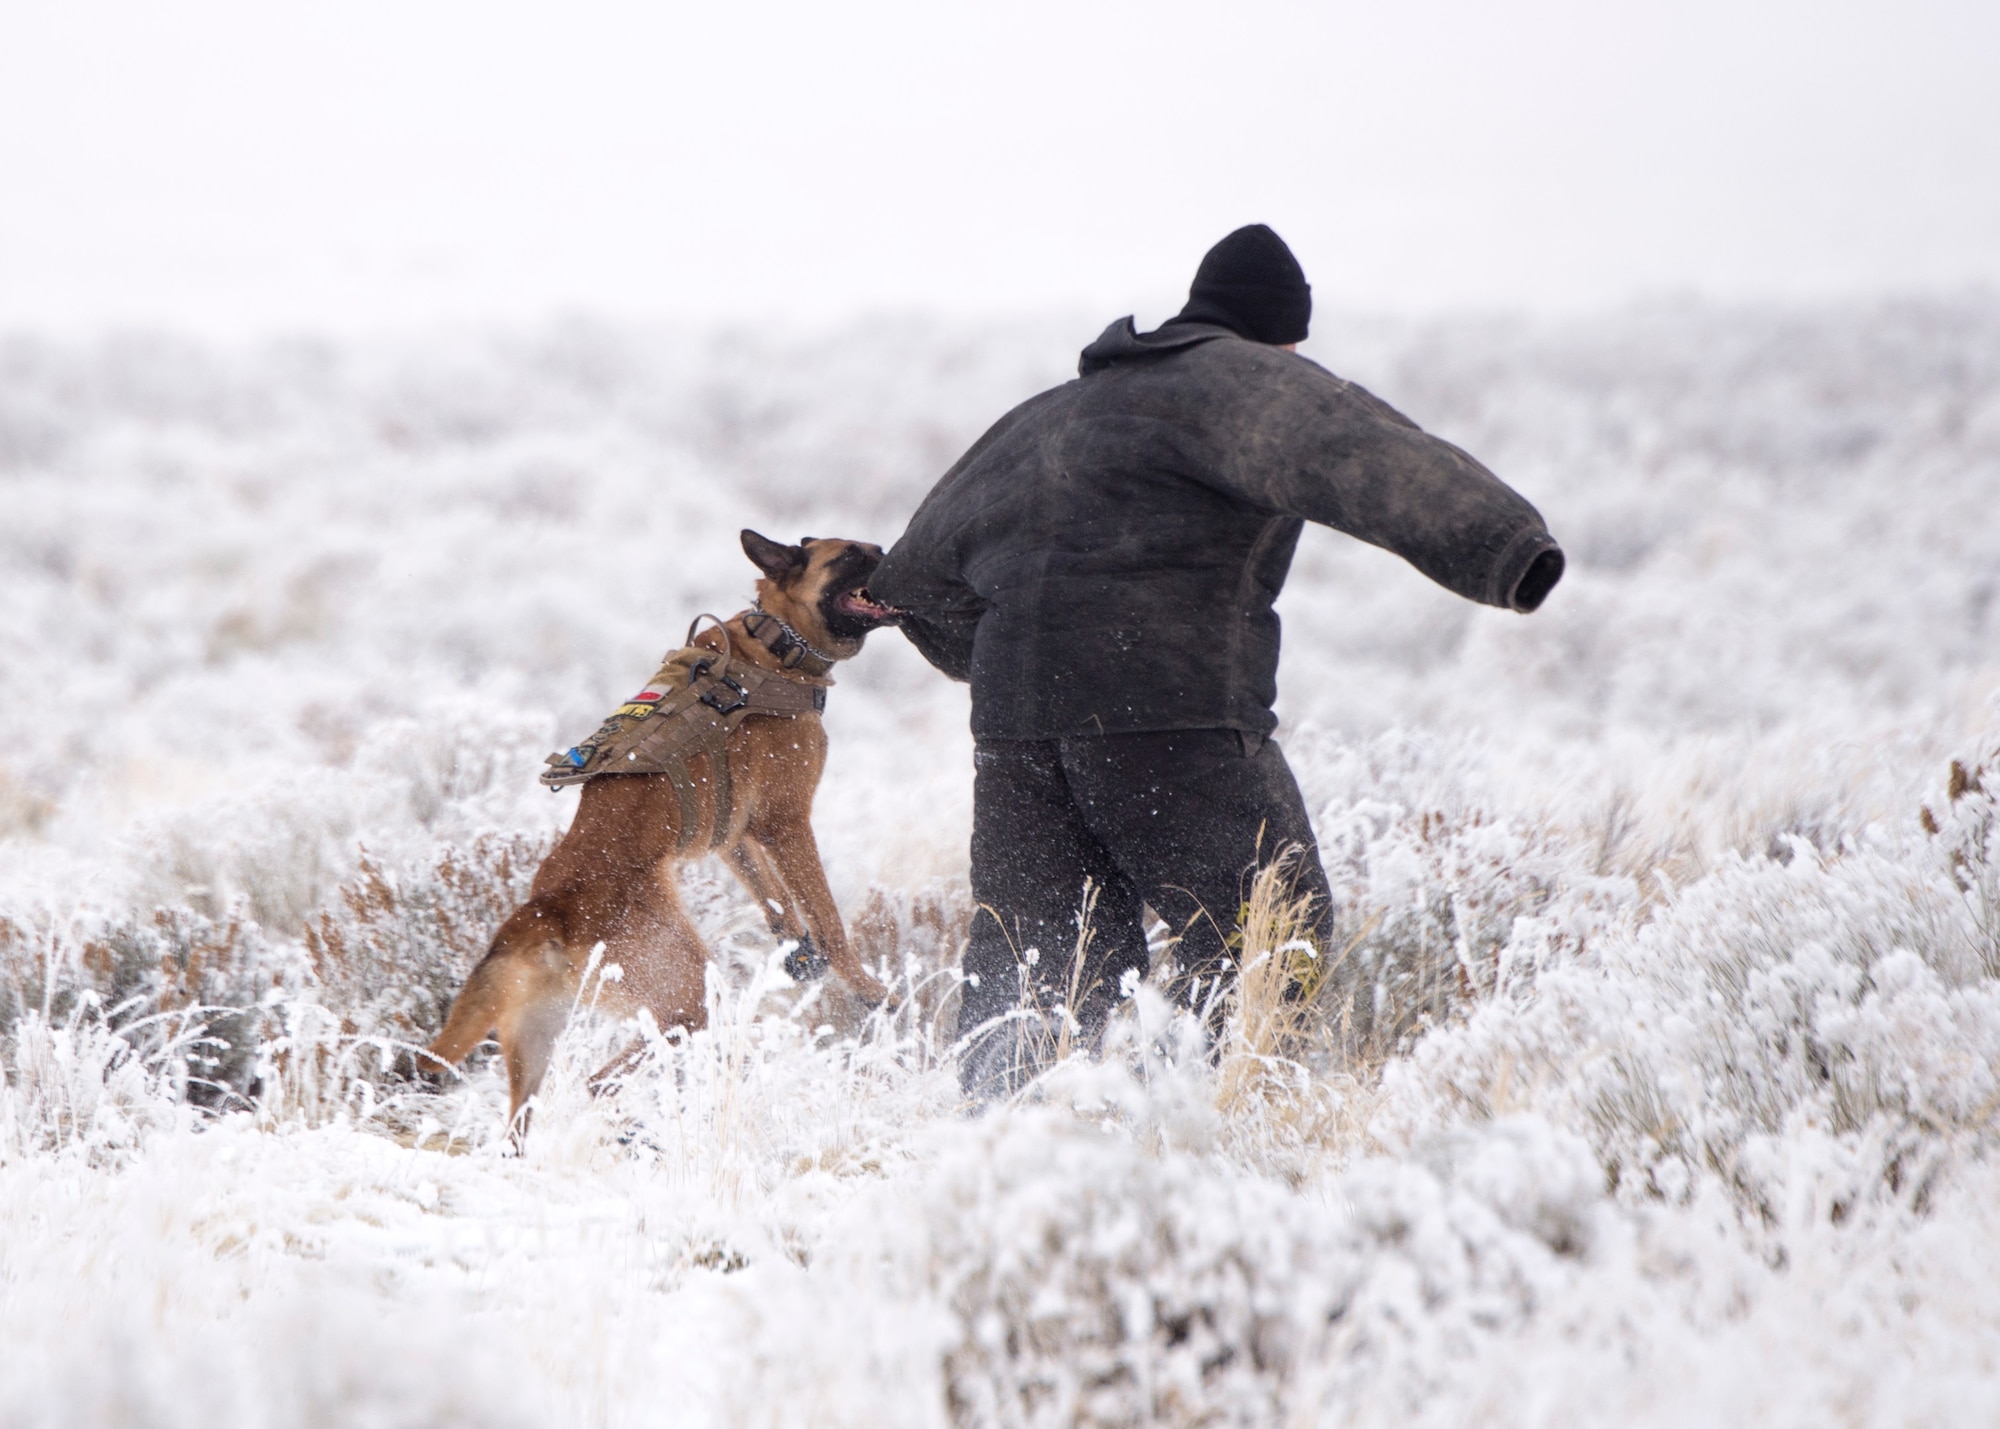 Military Working Dog Ingo takes down an enemy threat during Gunfighter Flag 18-1 Dec. 14, 2017, at Mountain Home Air Force Base, Idaho. Gunfighter Flag 18-1 took place Dec. 11-15, simulating joint service operations that might be encountered in a deployed environment. (U.S. Air Force photo by Airman 1st Class Jeremy D. Wolff)